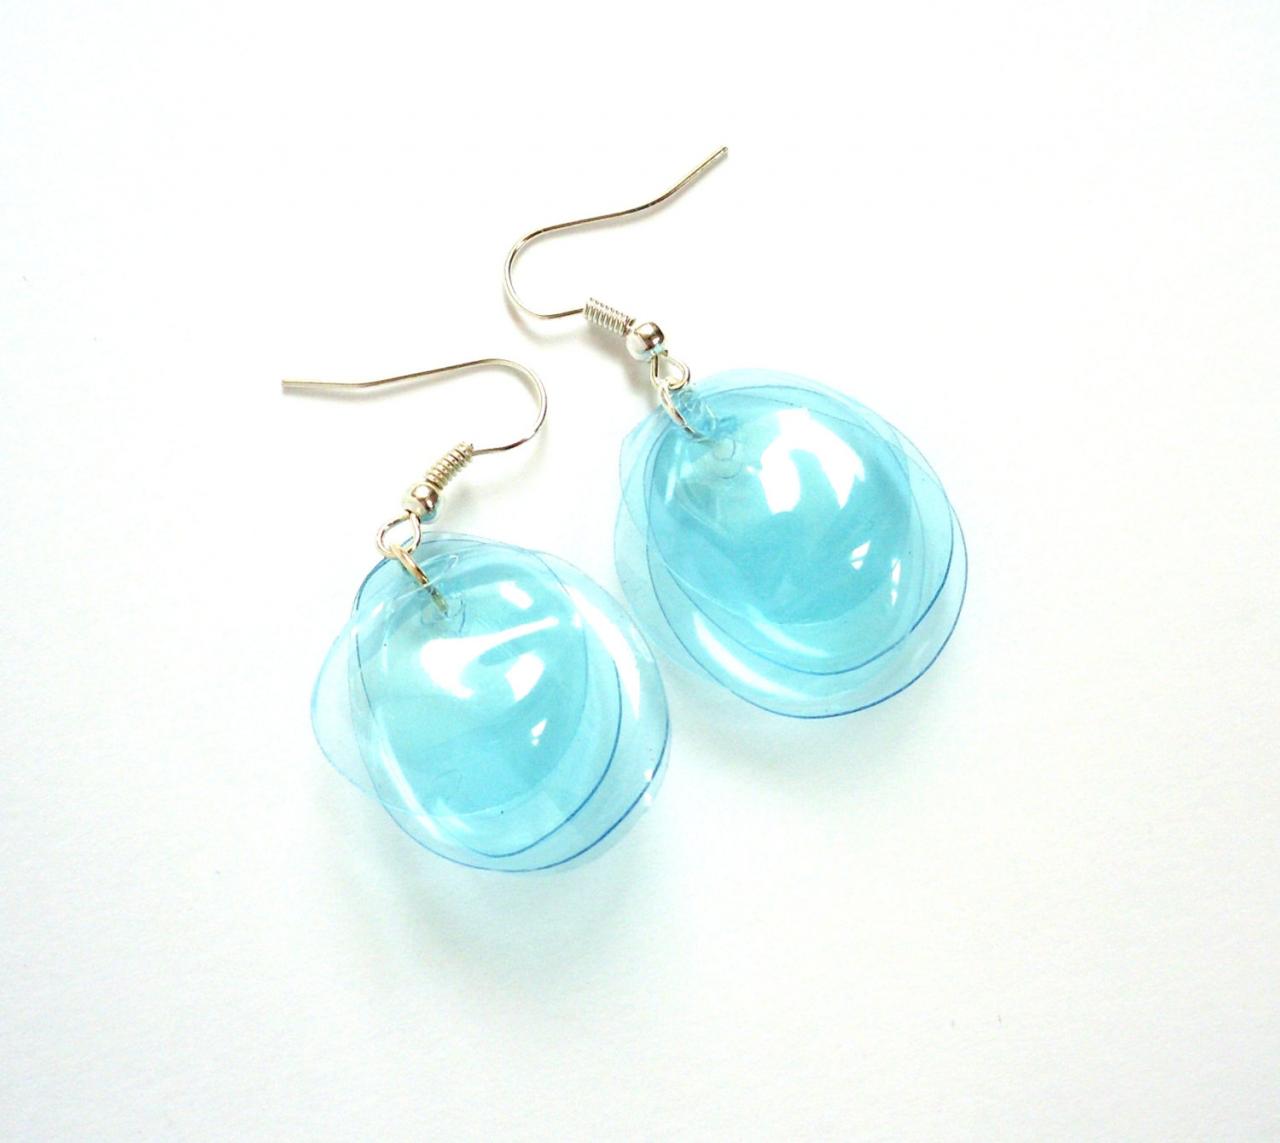 Small Turquoise Earrings Hancrafted Of Recycled Plastic Bottle, Repurposed Upcycled Jewelry, Cyan Blue Earings